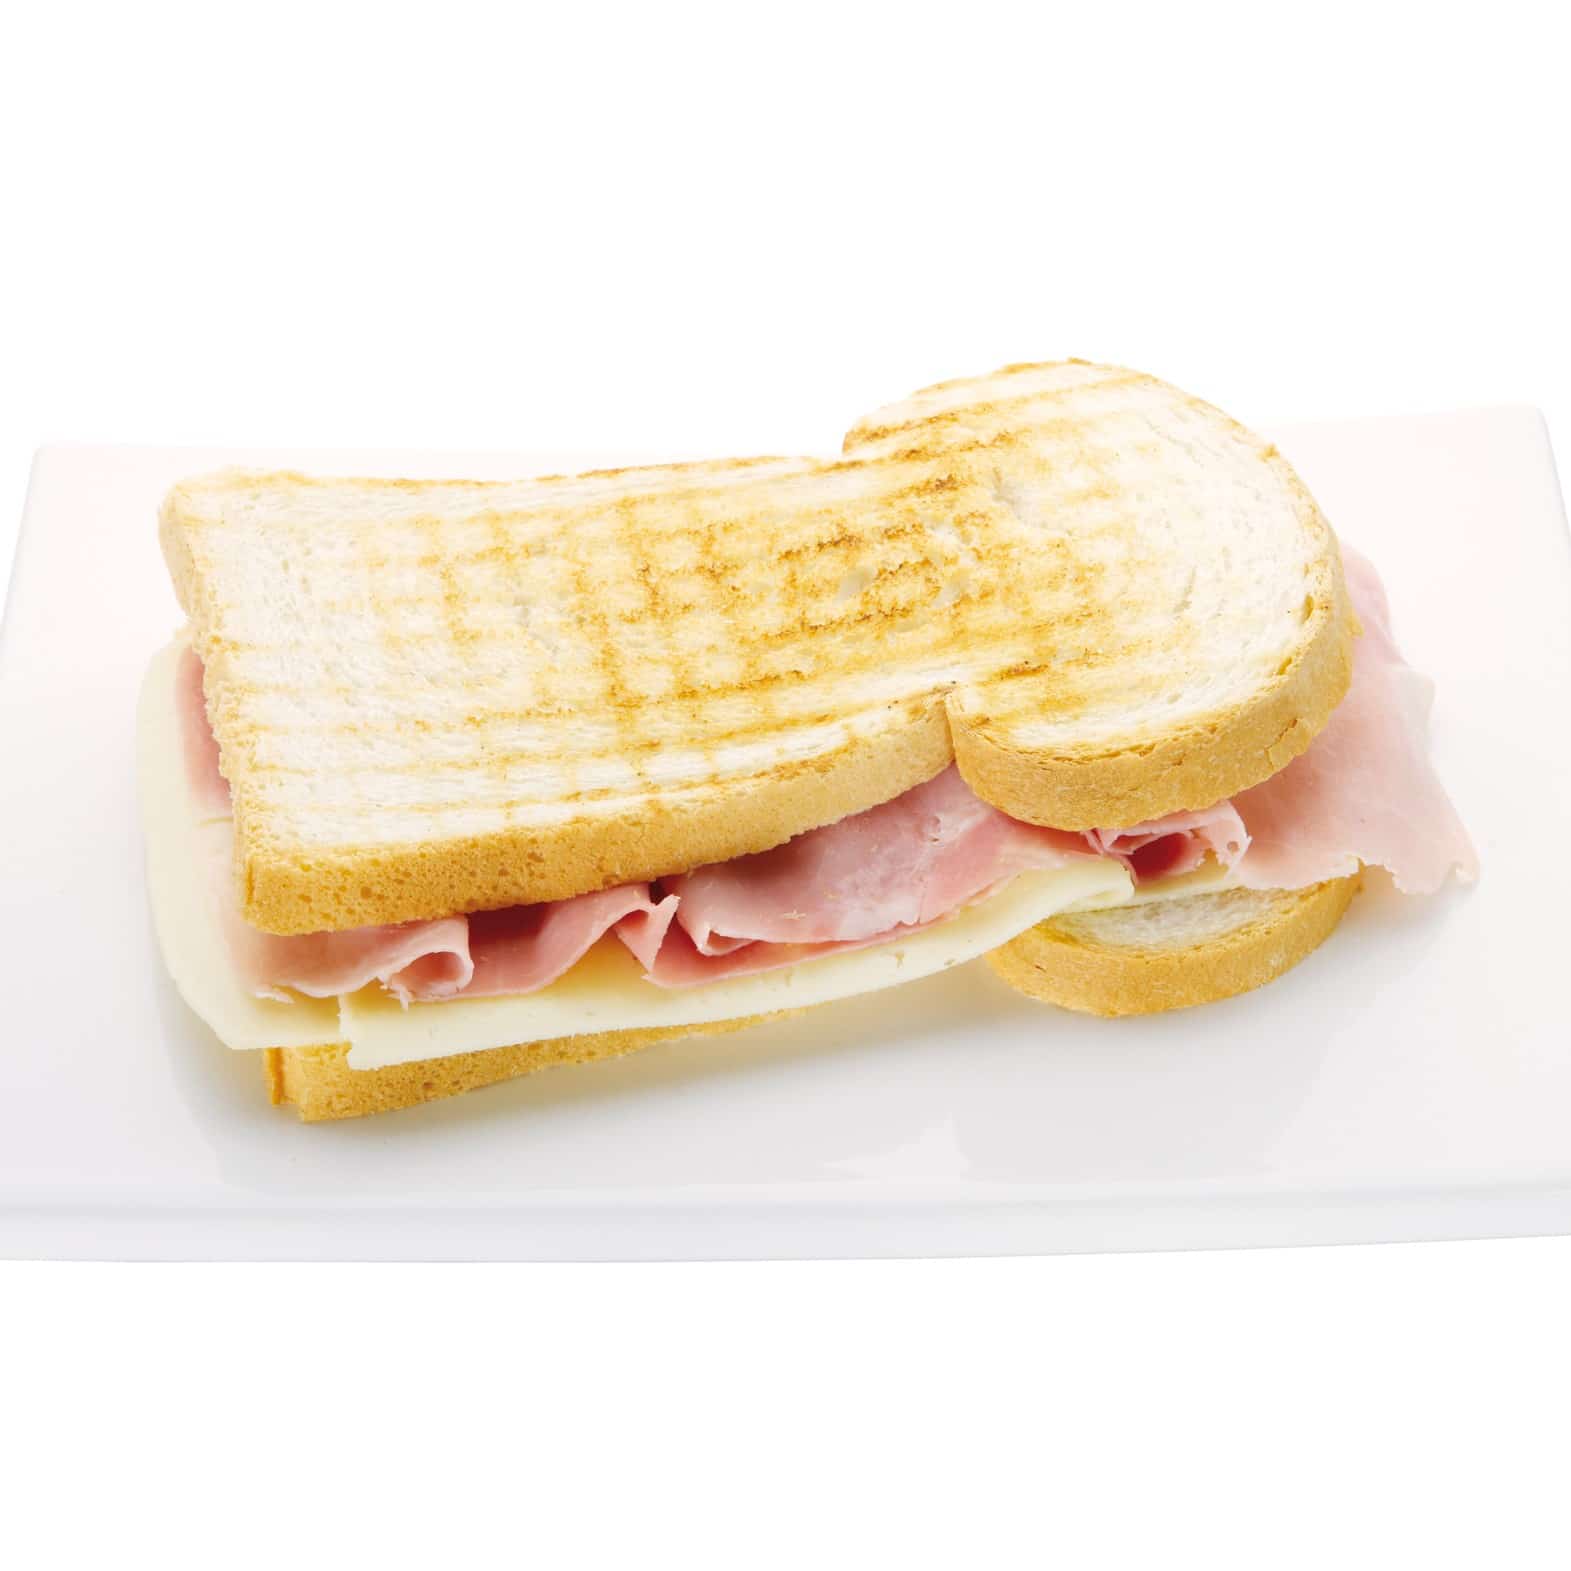 TOAST WITH HAM AND CHEESE - € 2.50